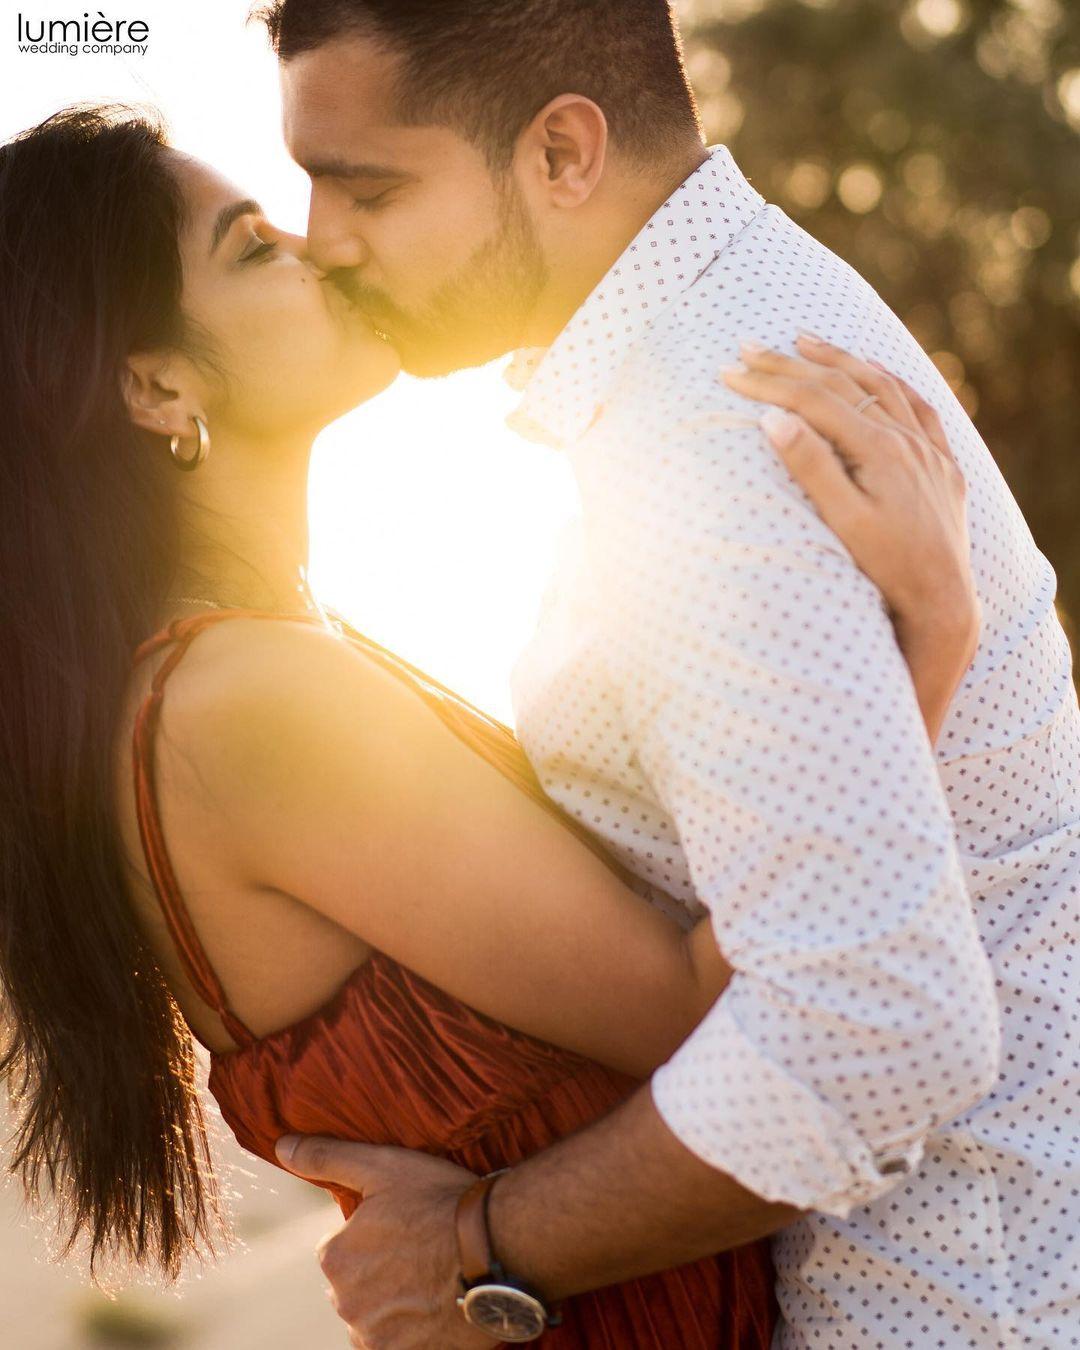 14+ Romantic Hugs & Kisses Images Ideas for You to Love